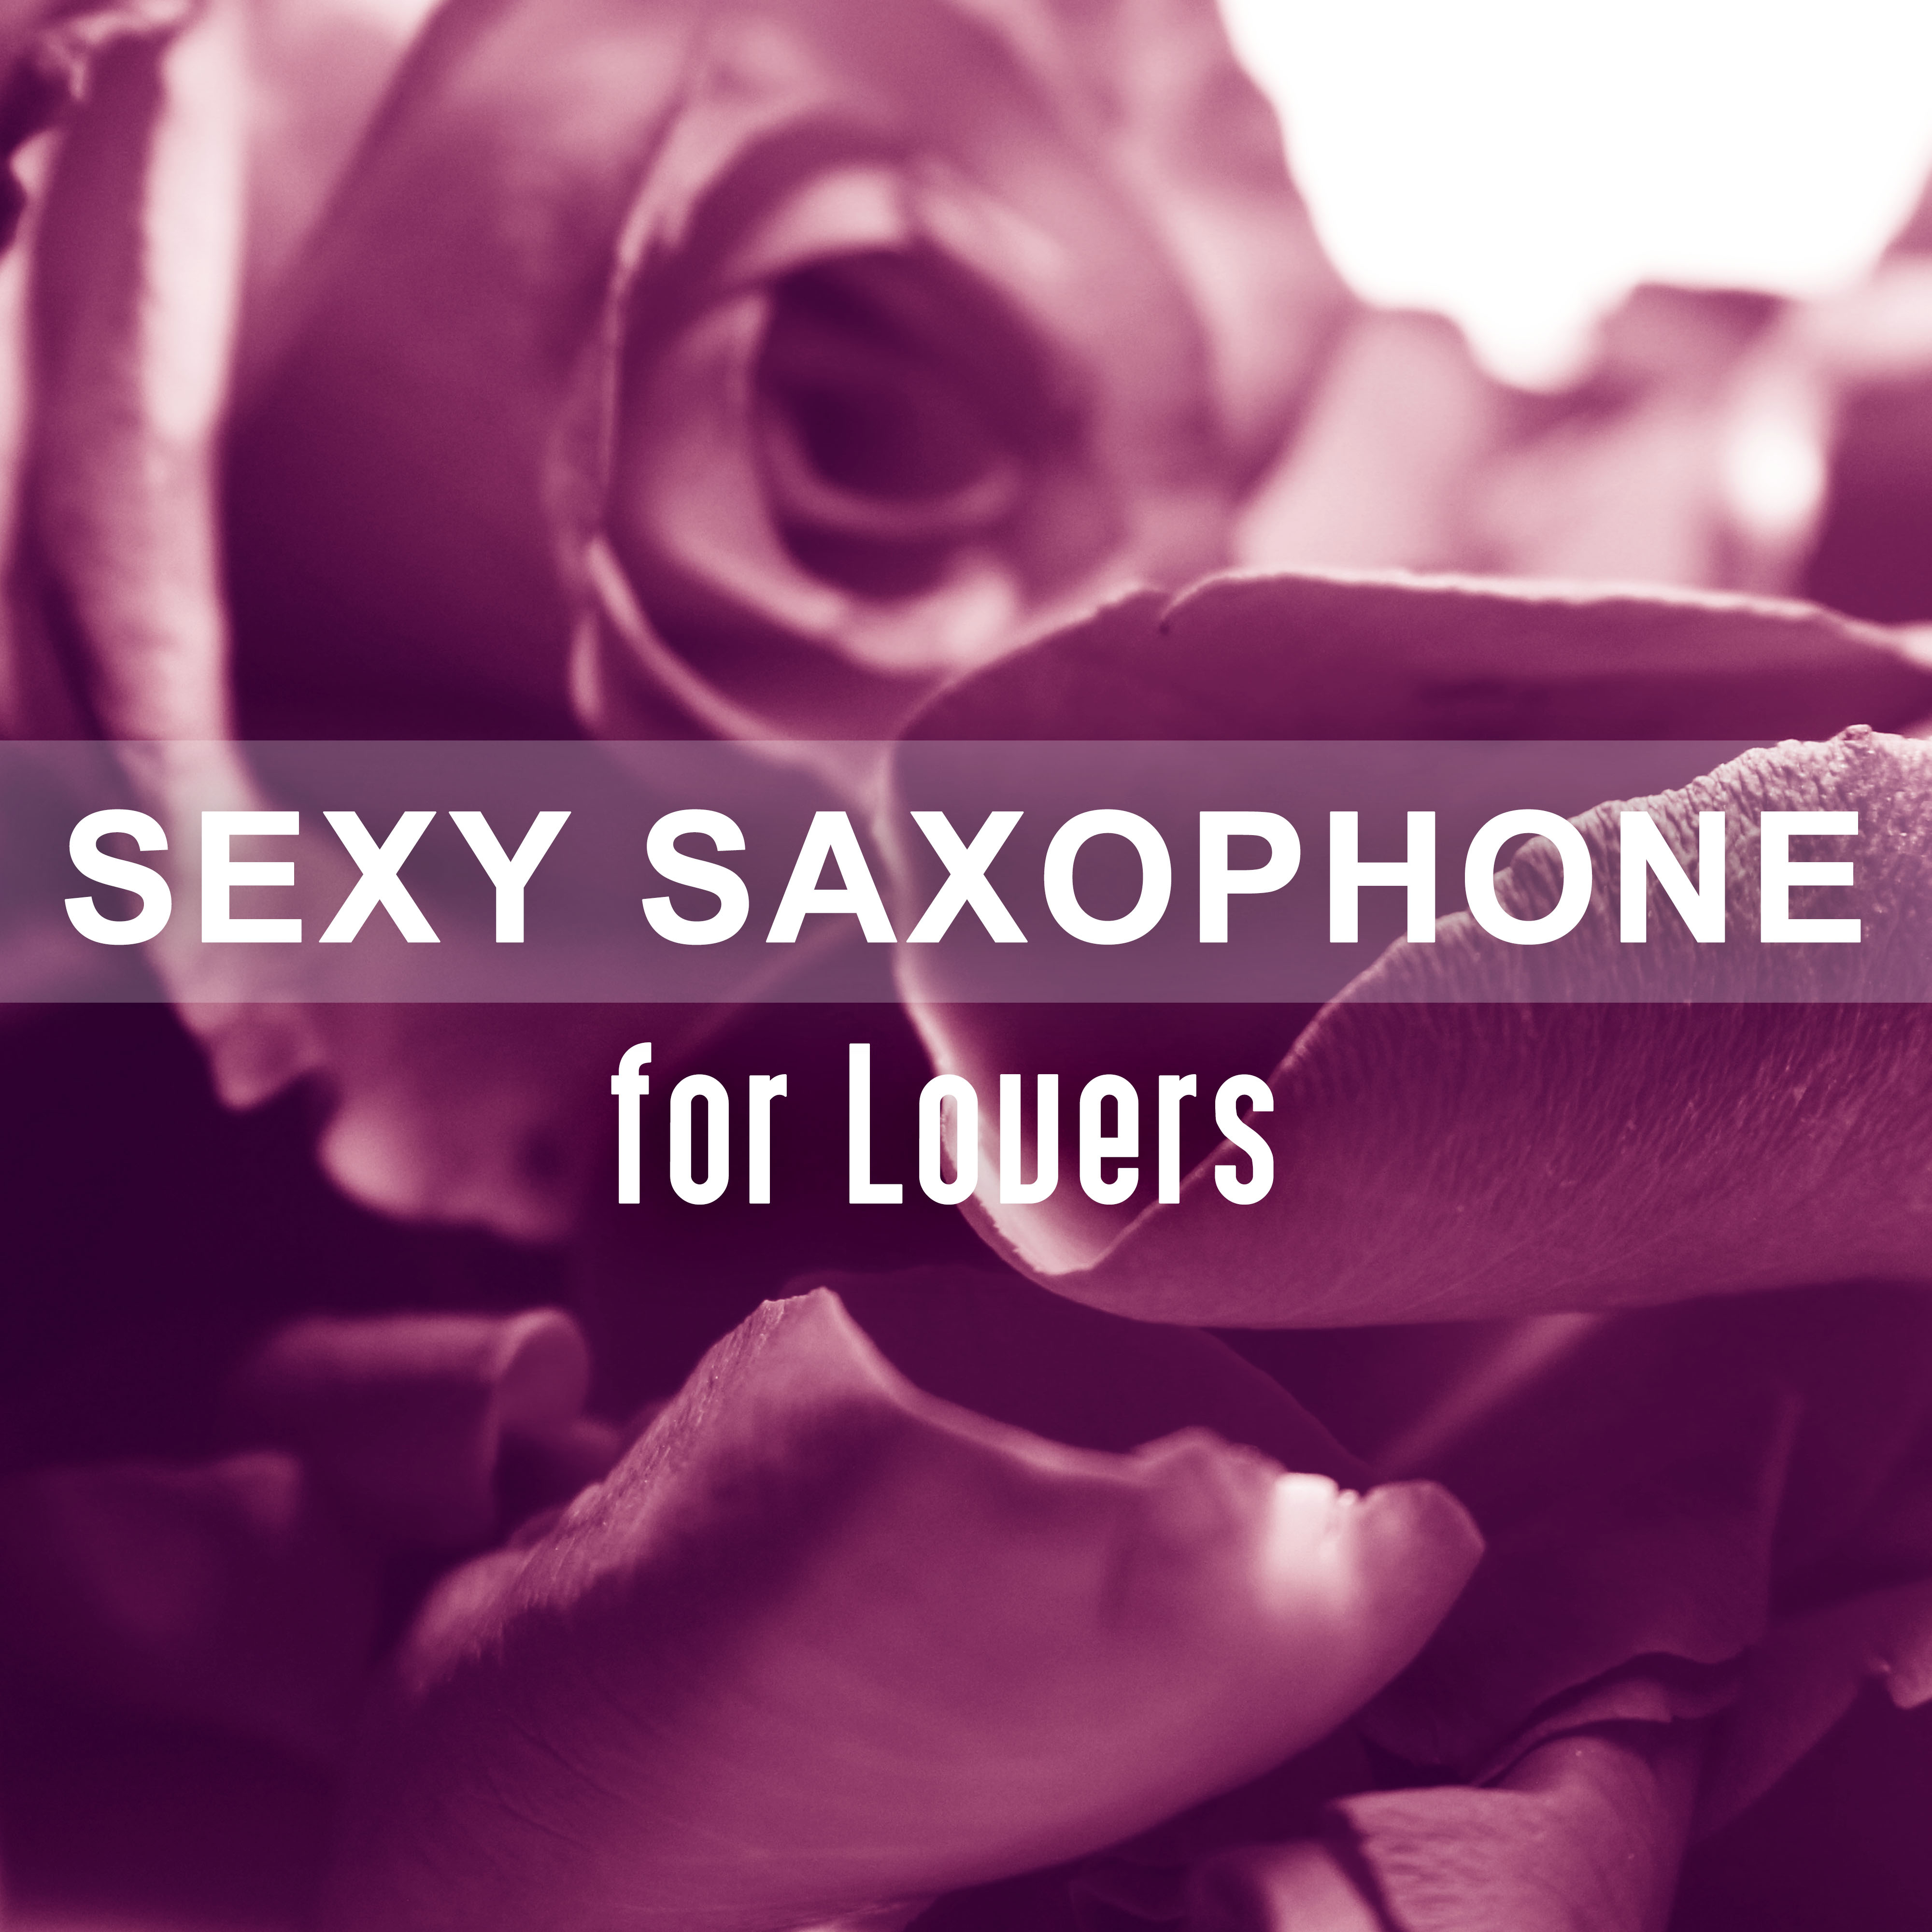 **** Saxophone for Lovers – Chilled Saxophone for Romantic Evening, **** Dance, Hot Massage, First Date